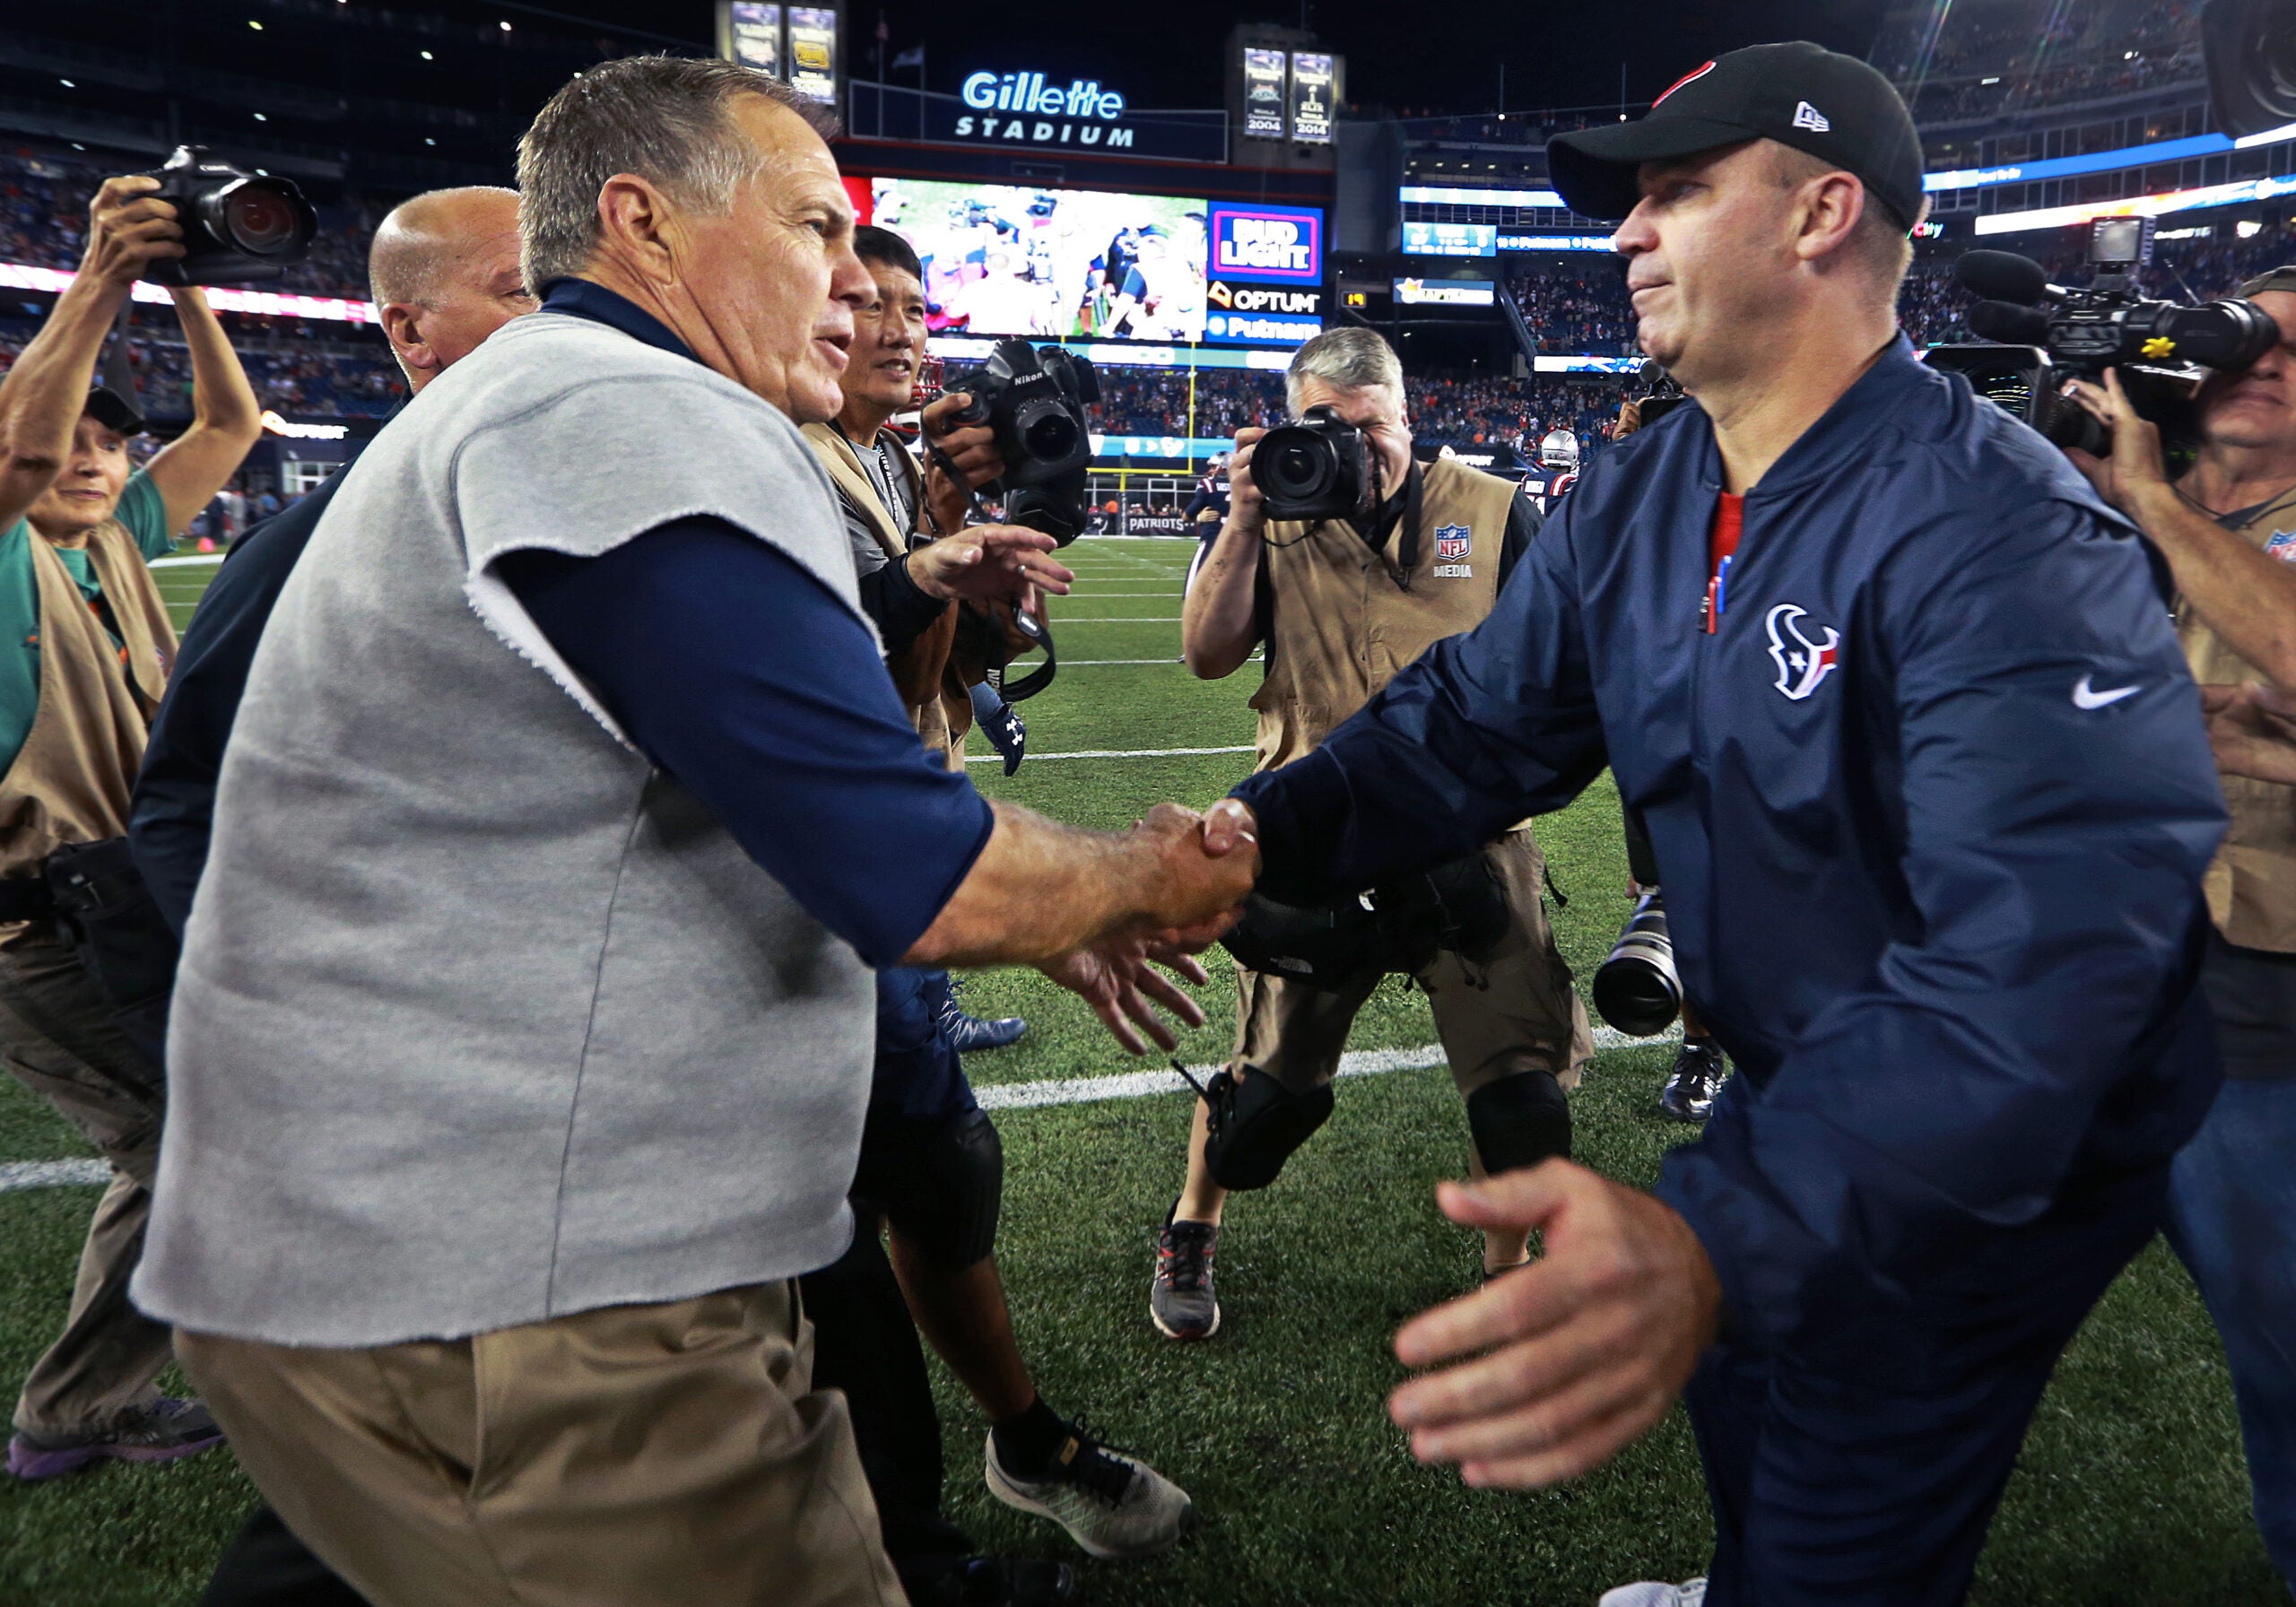 Patriots head coach Bill Belichick (left) and Texans head coach Bill O'Brien (right) shake hands after New England's victory. The New England Patriots hosted the Houston Texans in a Thursday night NFL regular season football game.